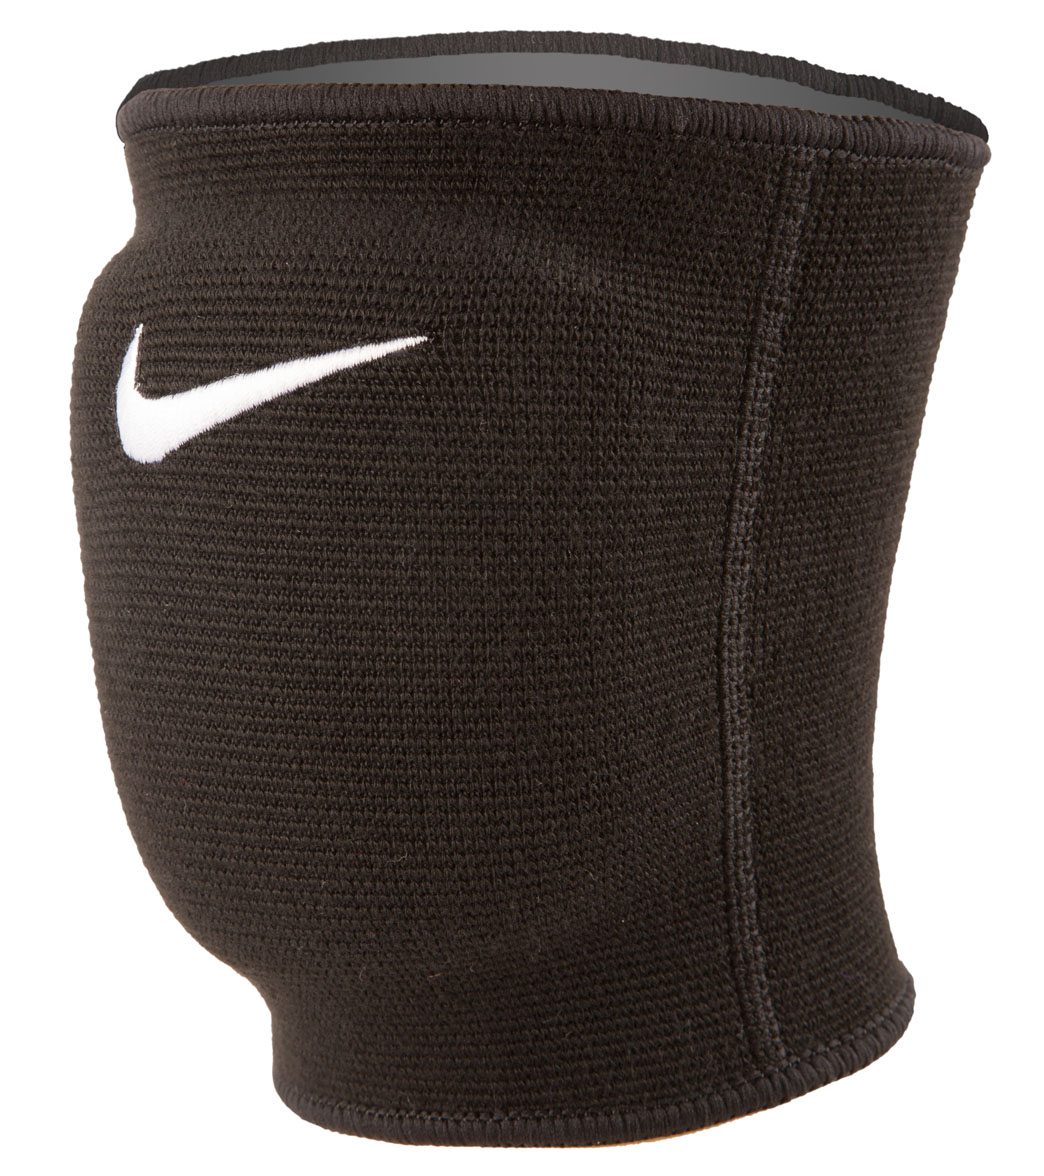 nike knee pads volleyball price